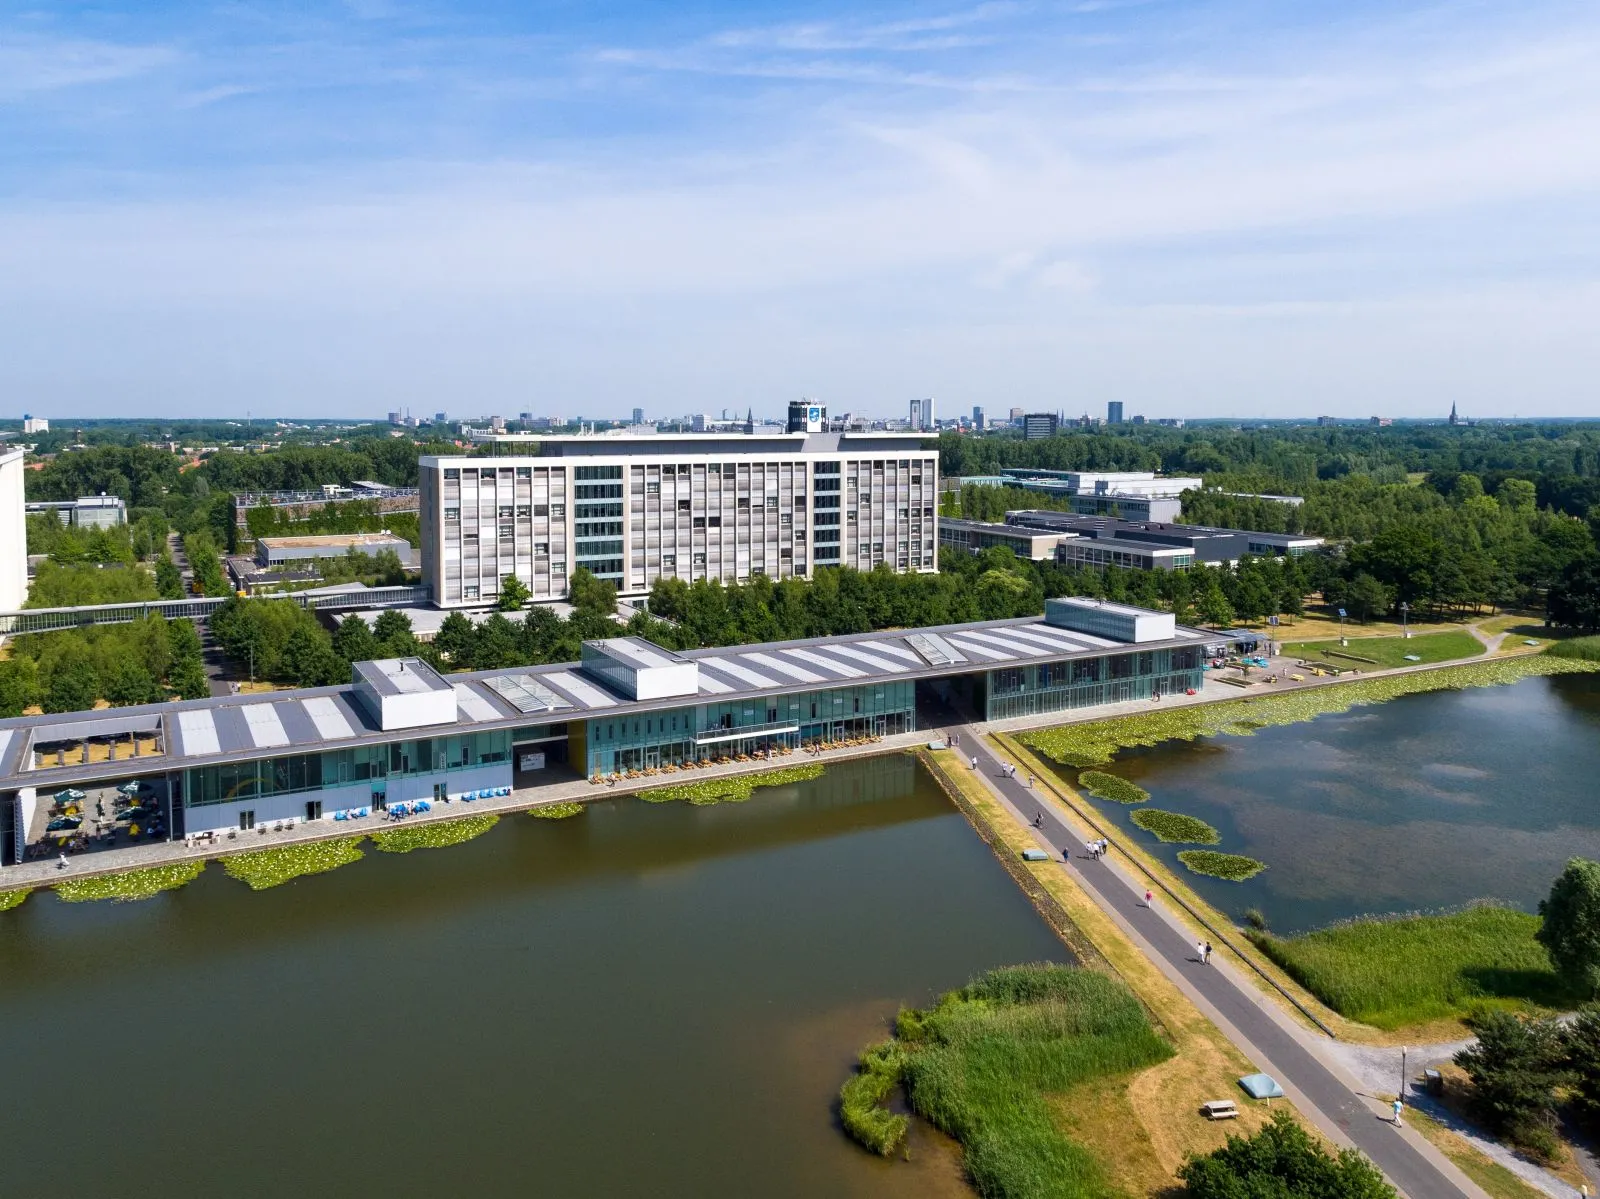 Our office at the High Tech Campus in Eindhoven